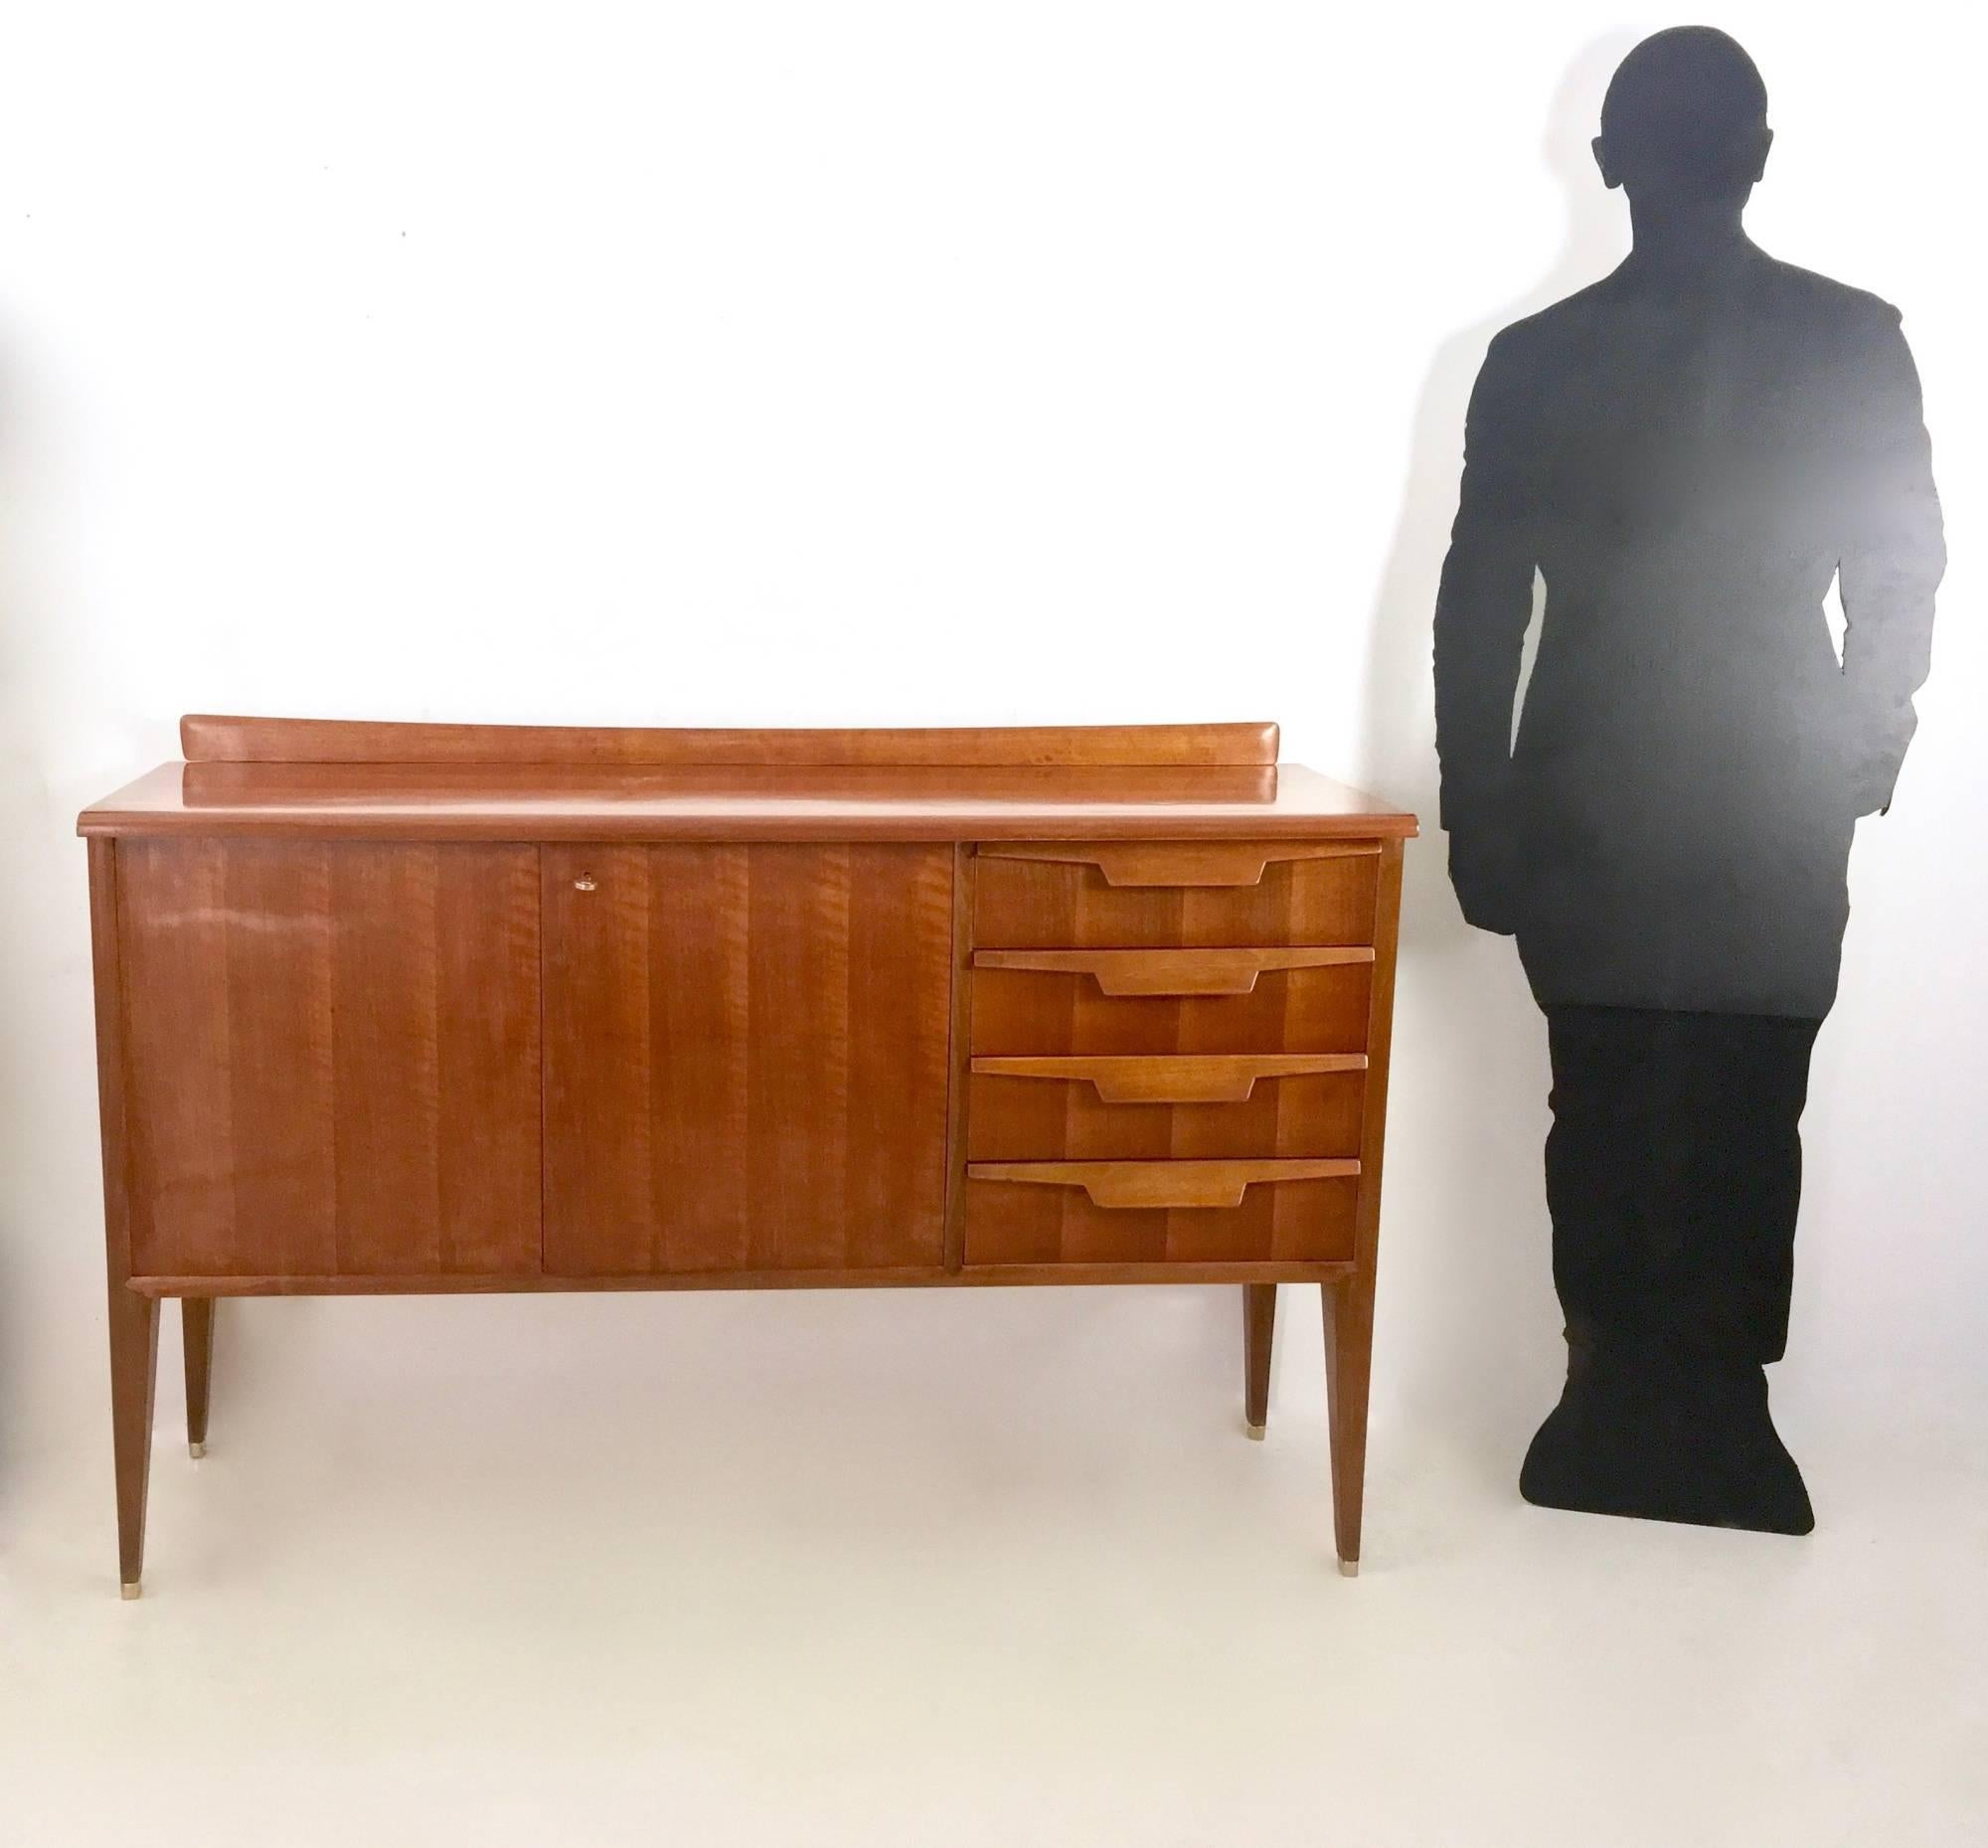 This sideboard is made in walnut and features maple interiors and solid brass feet caps.
Its drawers and legs recall Gio Ponti's design. 
It may show slight traces of use due to its age, but it has been polished perfectly with shellac and it is